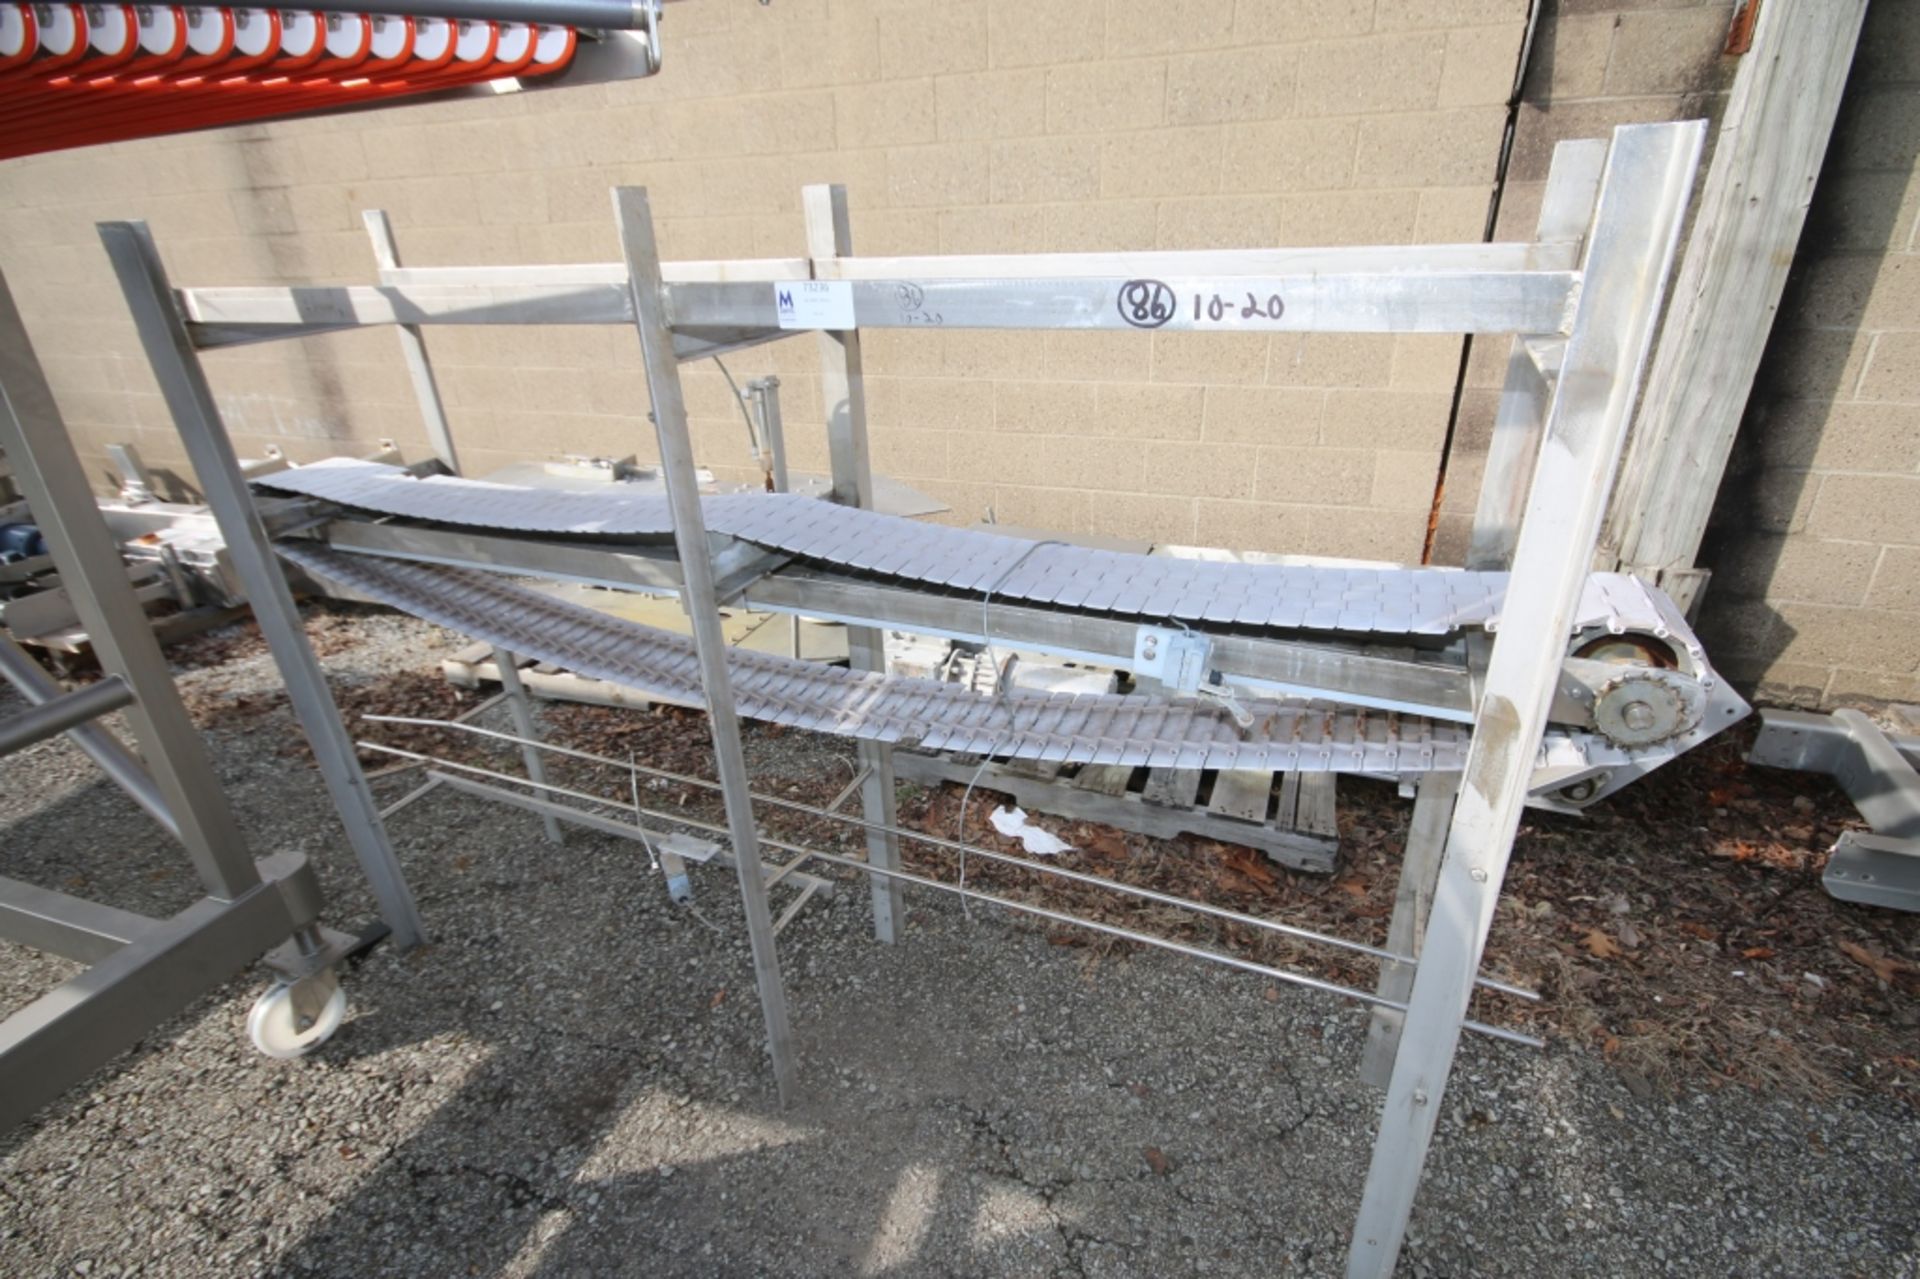 8 ft L x 40" H S/S Conveyor Section with 7.5" W Plastic Chain (INV#73236)(Located at the MDG